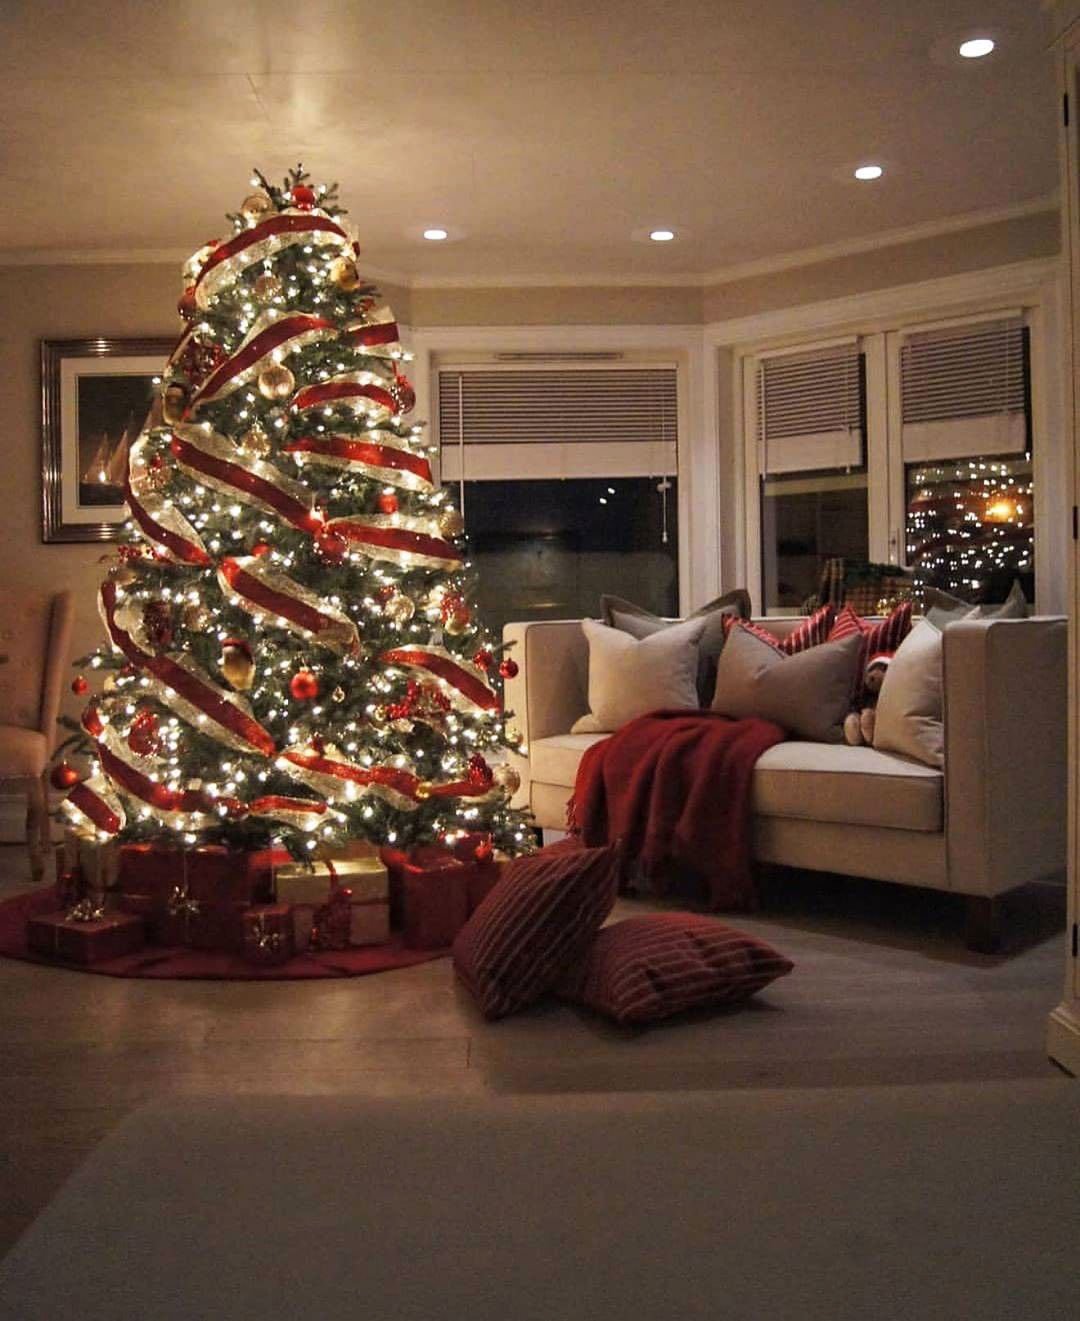 Traditional And Original Decorations-christmas tree decorating ideas pictures